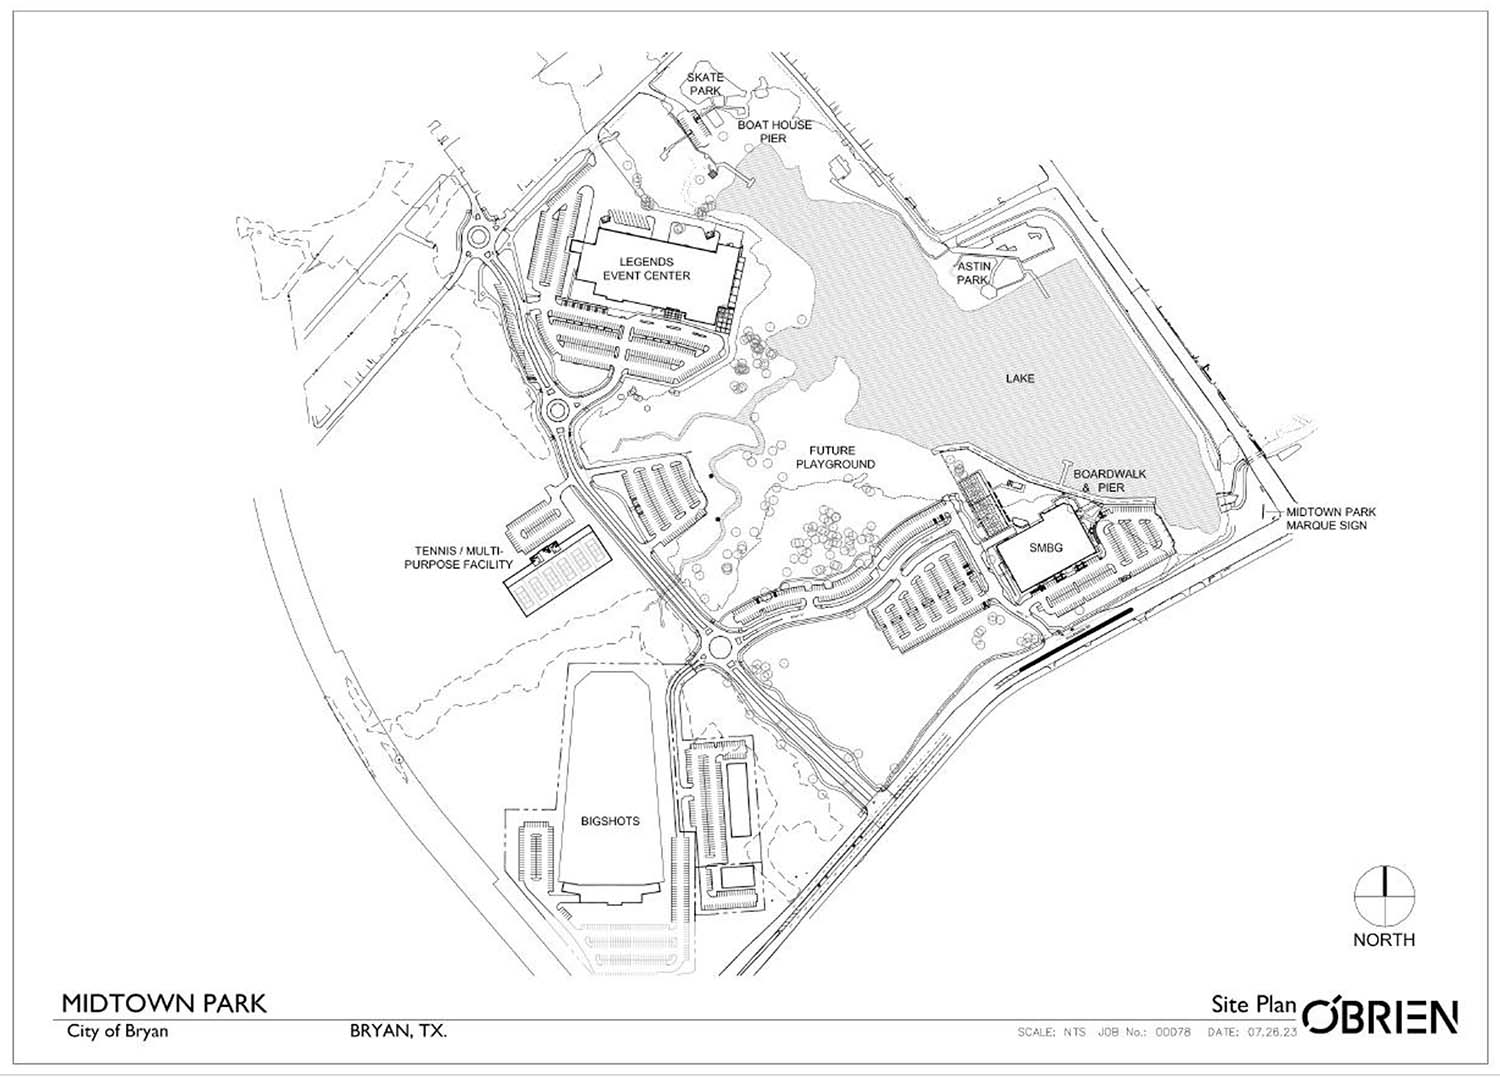 Map of Midtown Park showing the location of the Texas A&M University Tennis Facility.